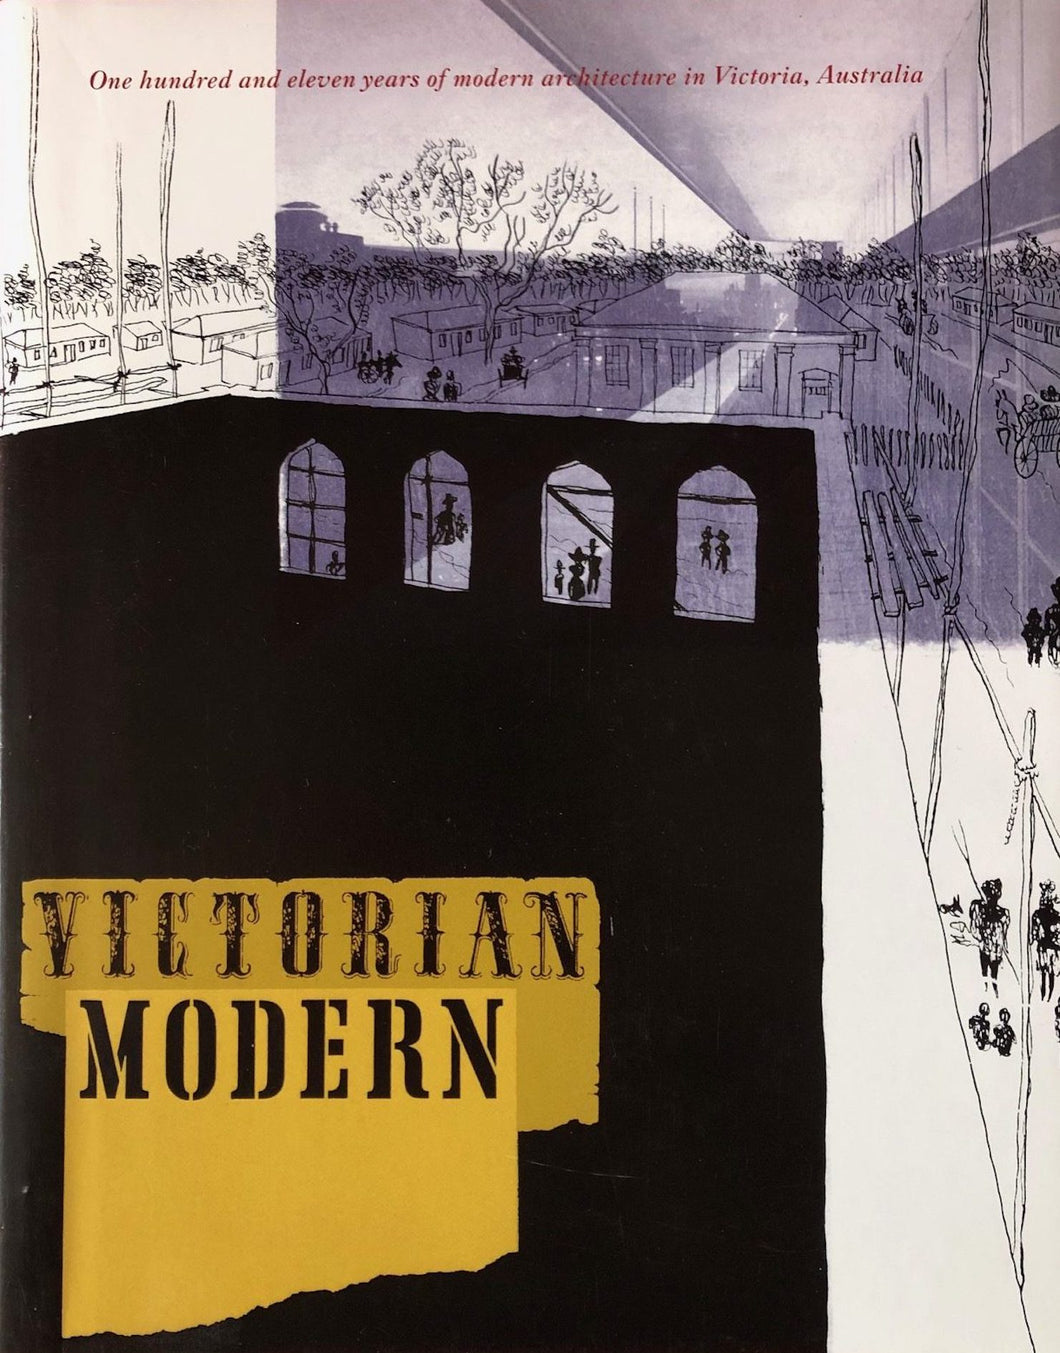 Victorian Modern – One hundred and eleven years of modern architecture in Victoria, Australia